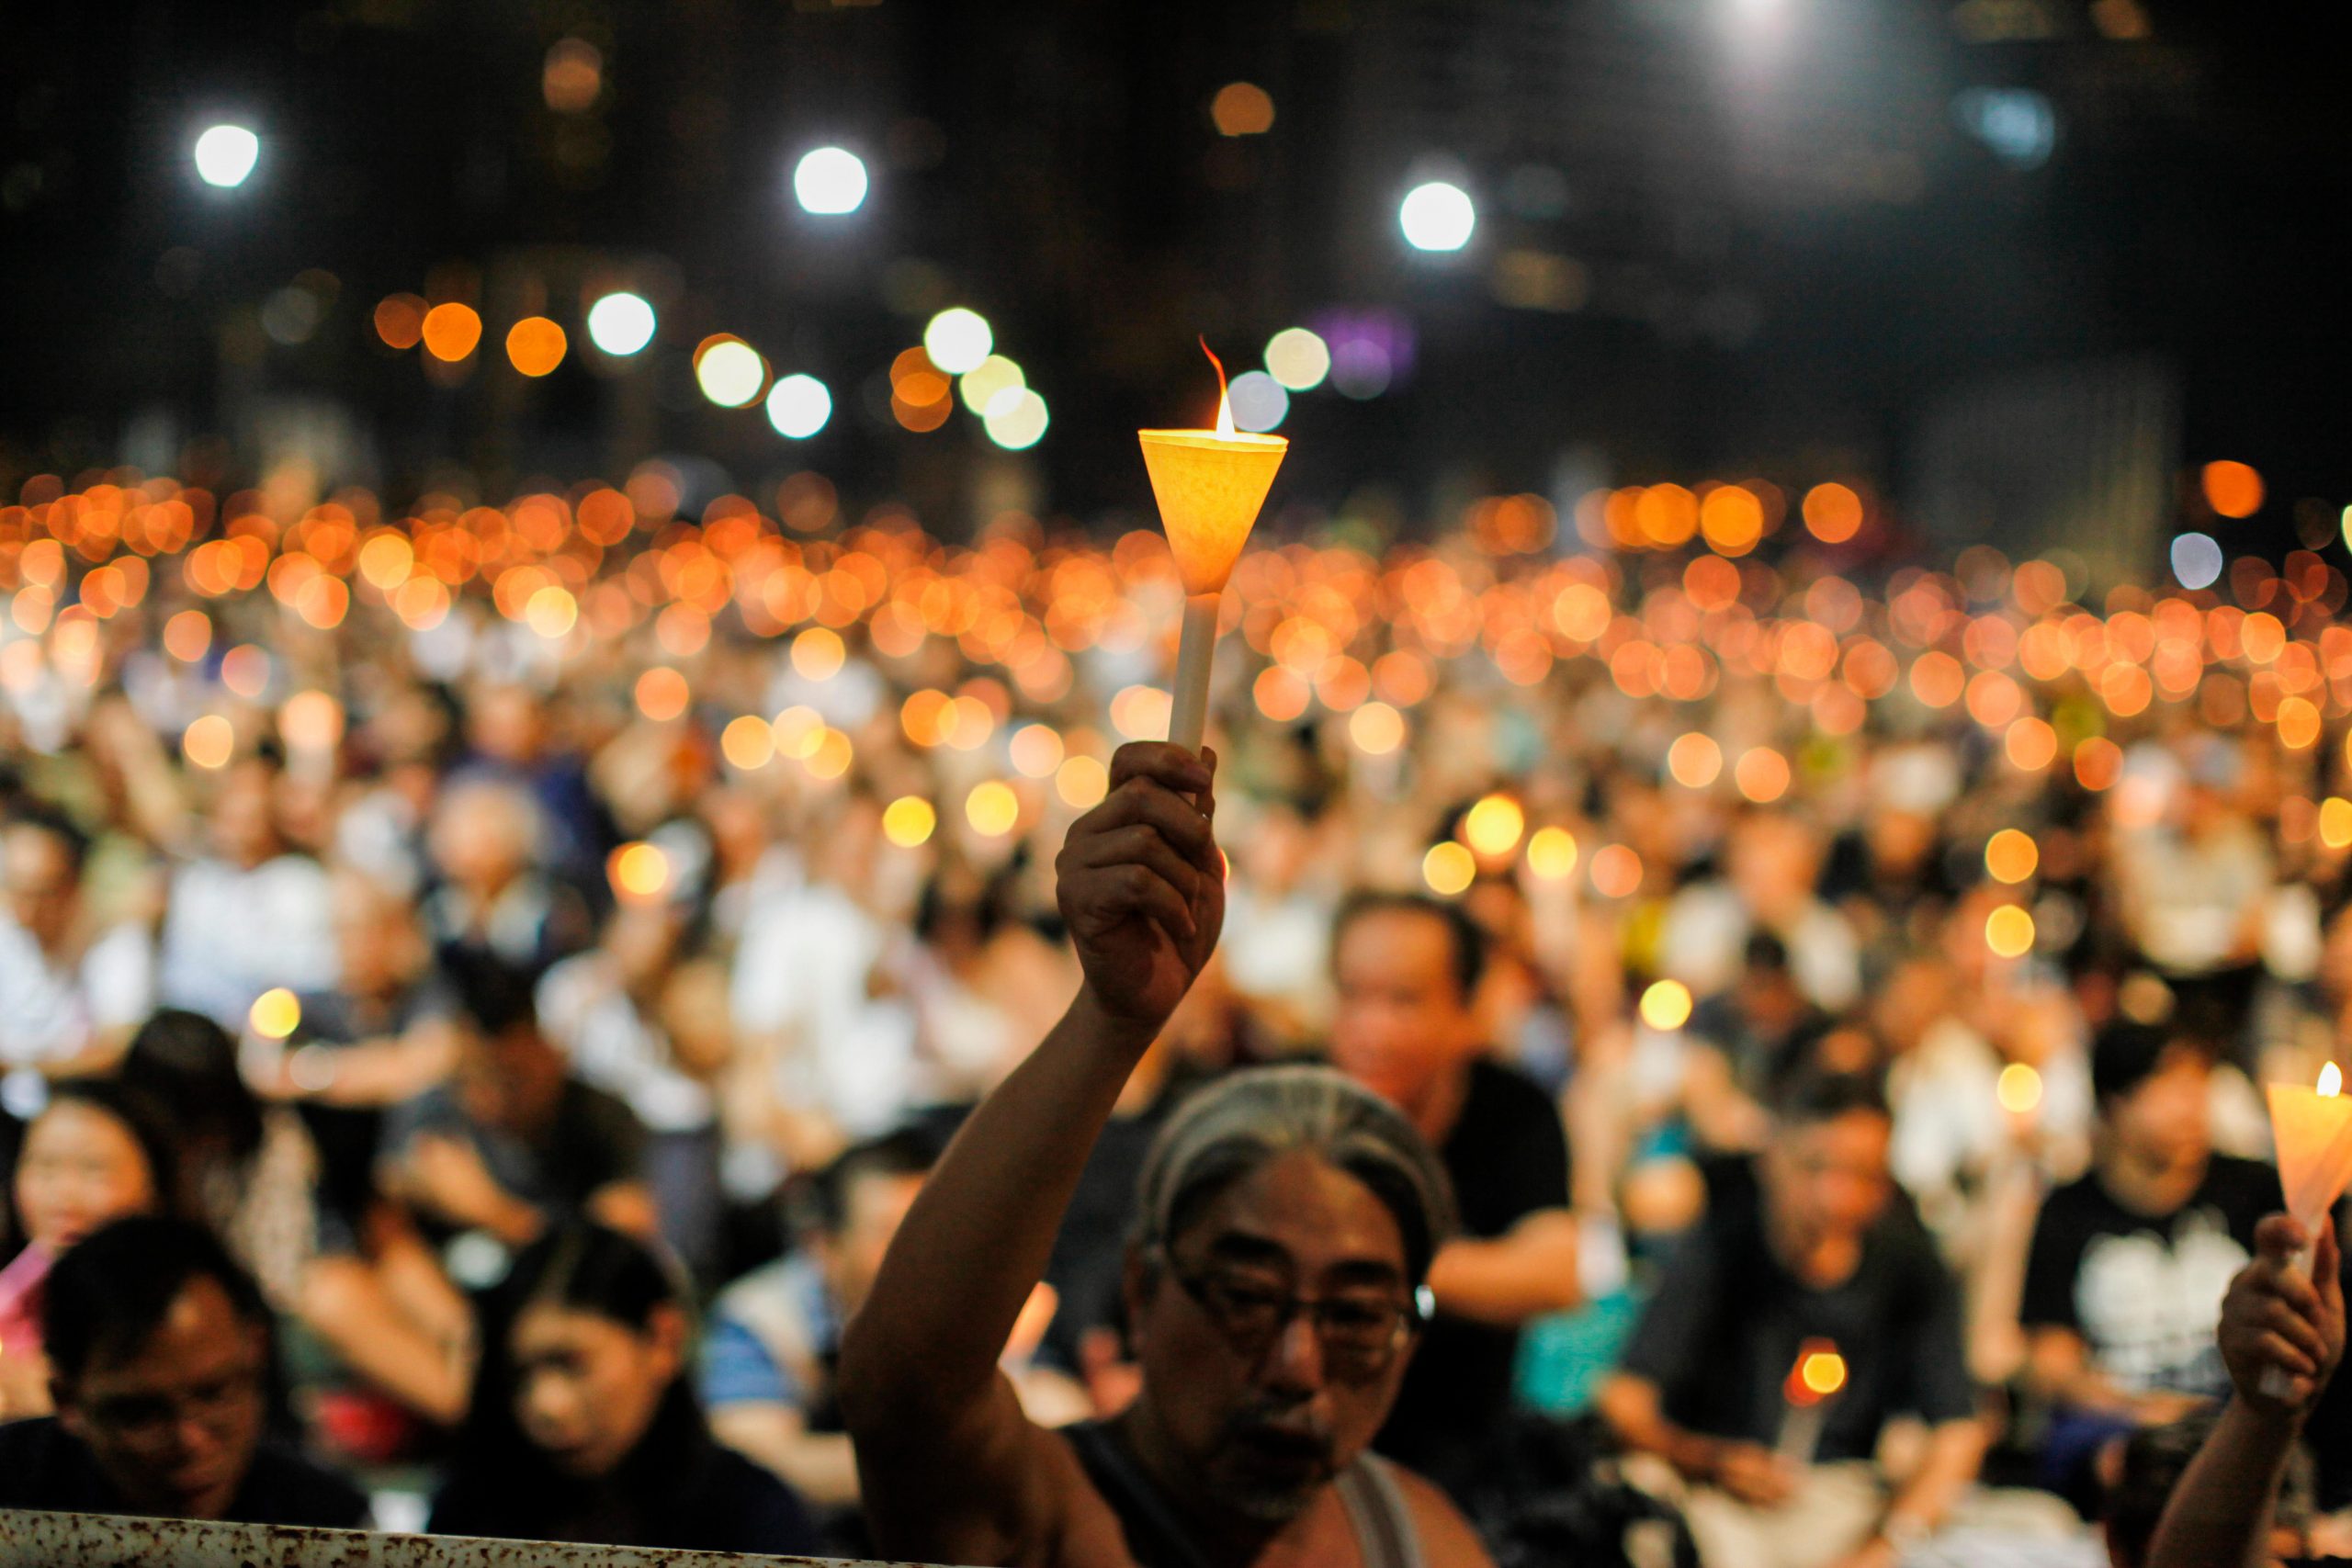 Tiananmen candlelights a sight too beautiful to last